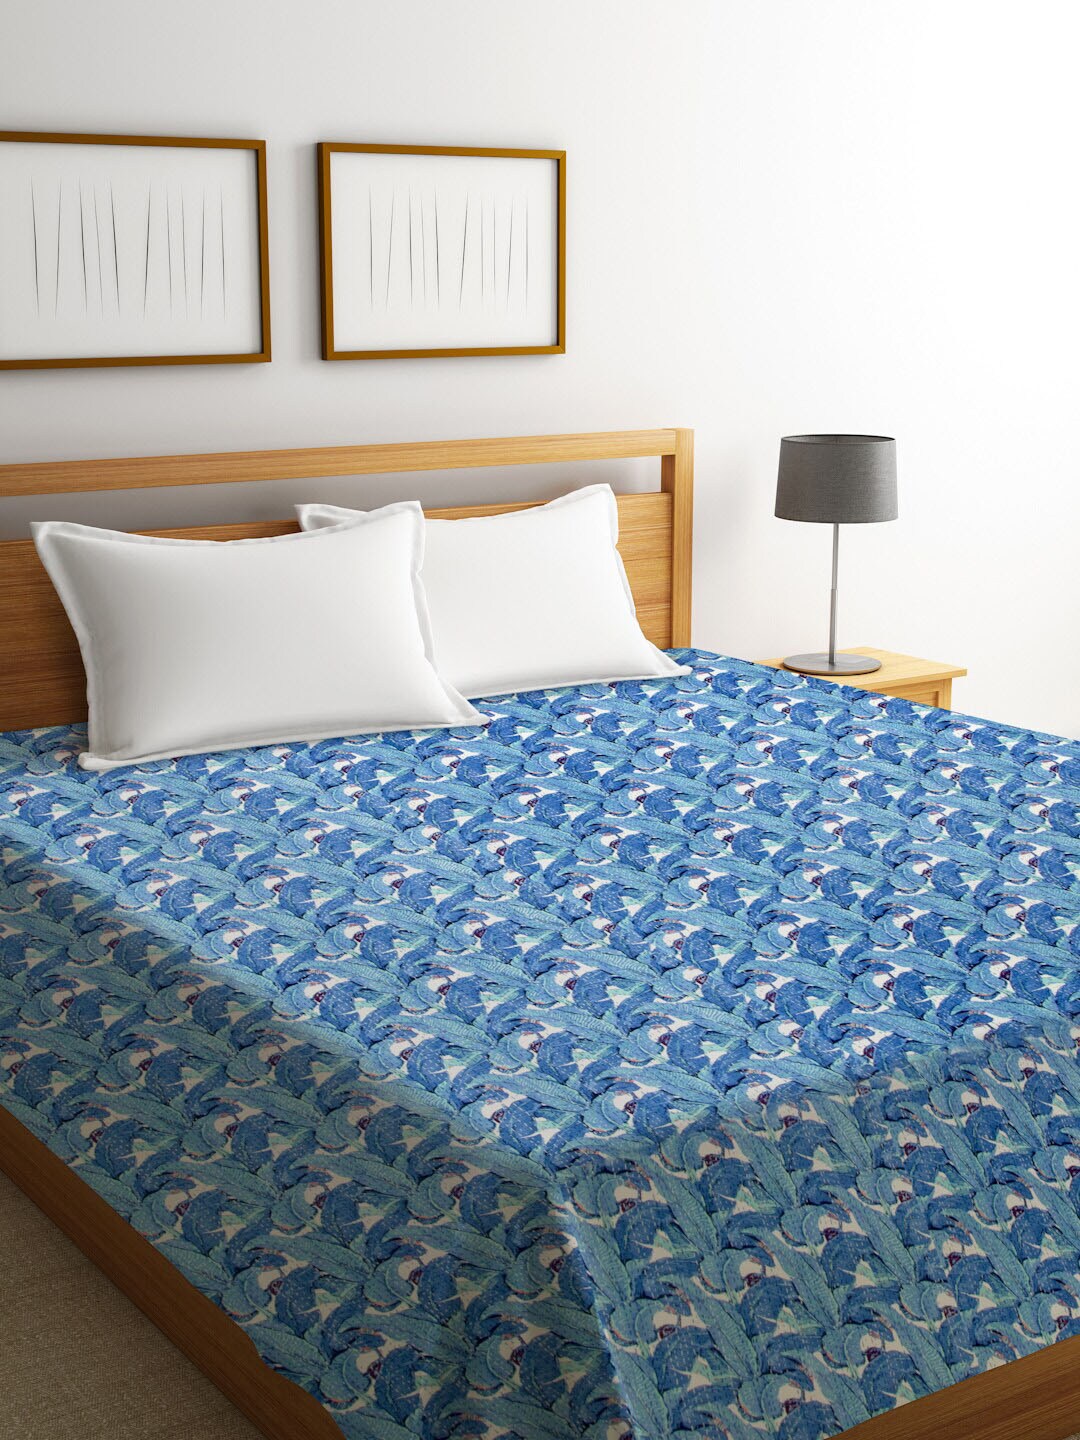 Rajasthan Decor Blue & White Jaipuri Kantha Printed Sustainable Cotton Double Bed Cover Price in India